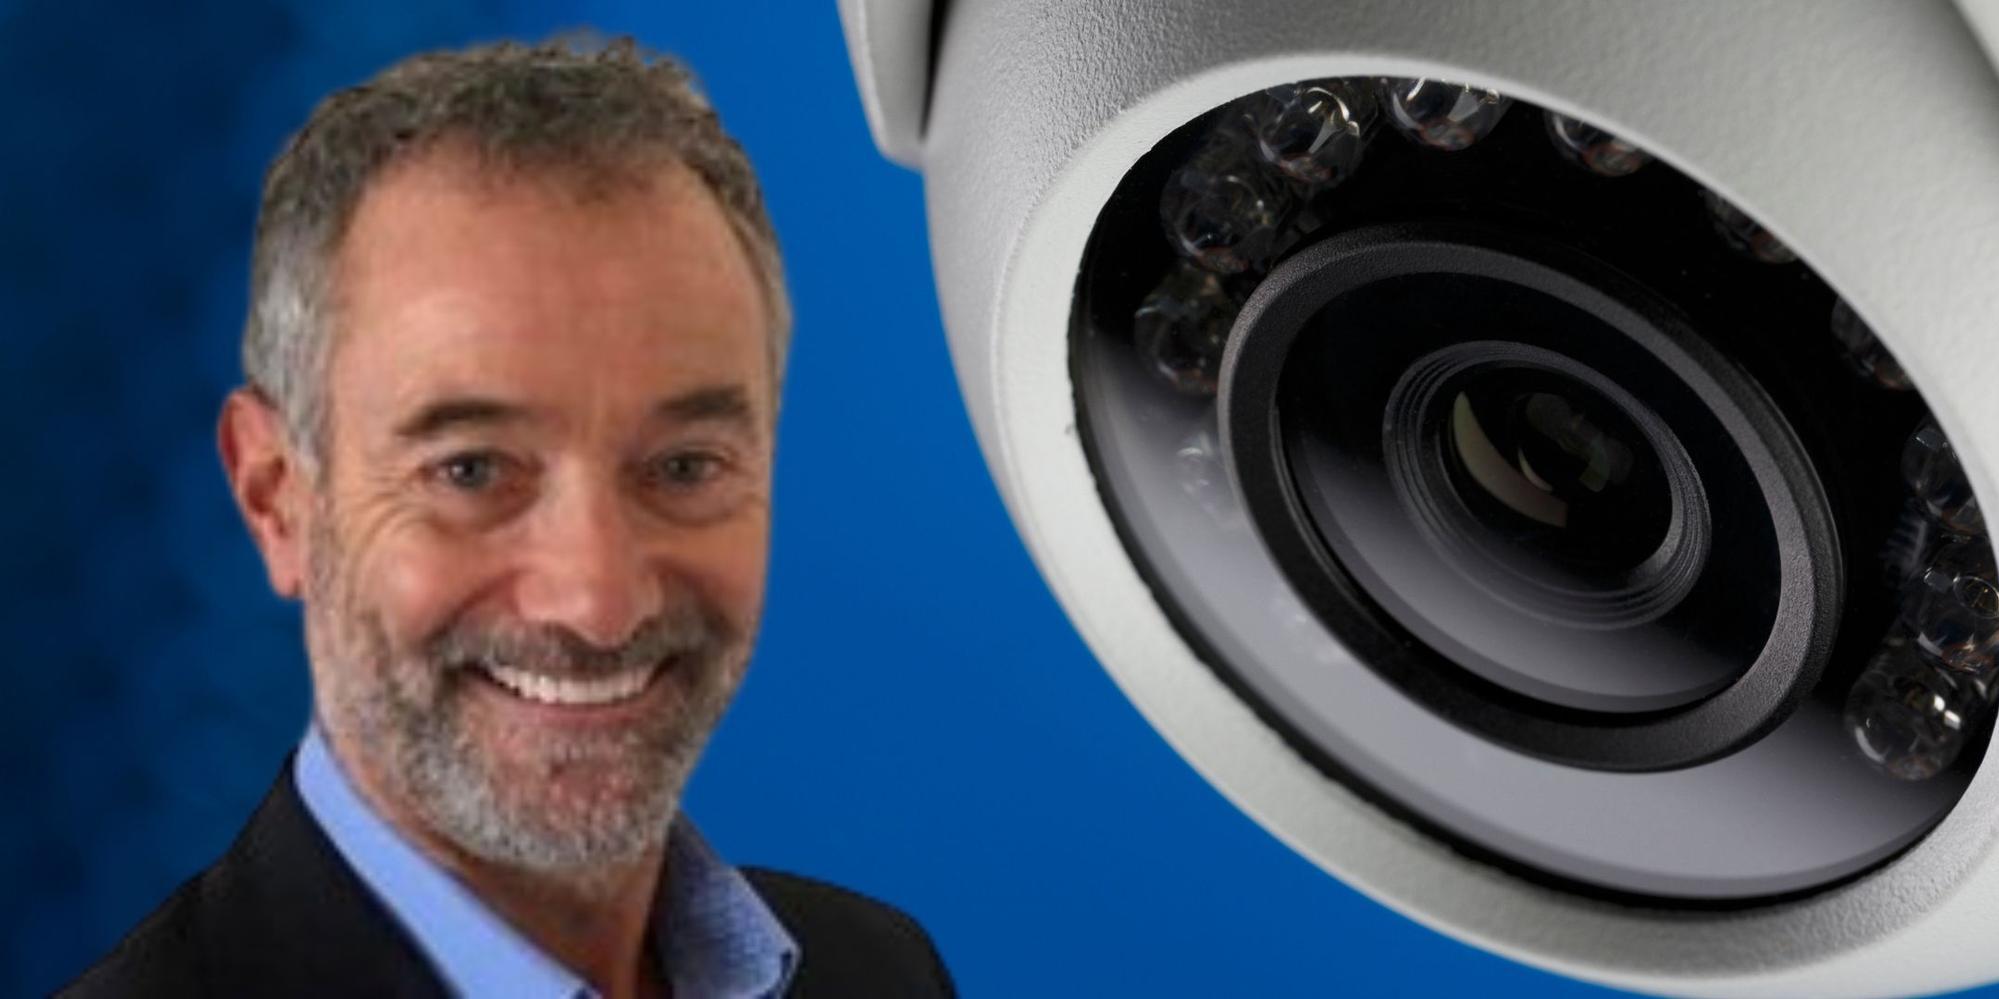 Biometrics & Surveillance Camera Commissioner resigns as post looks set to be abolished